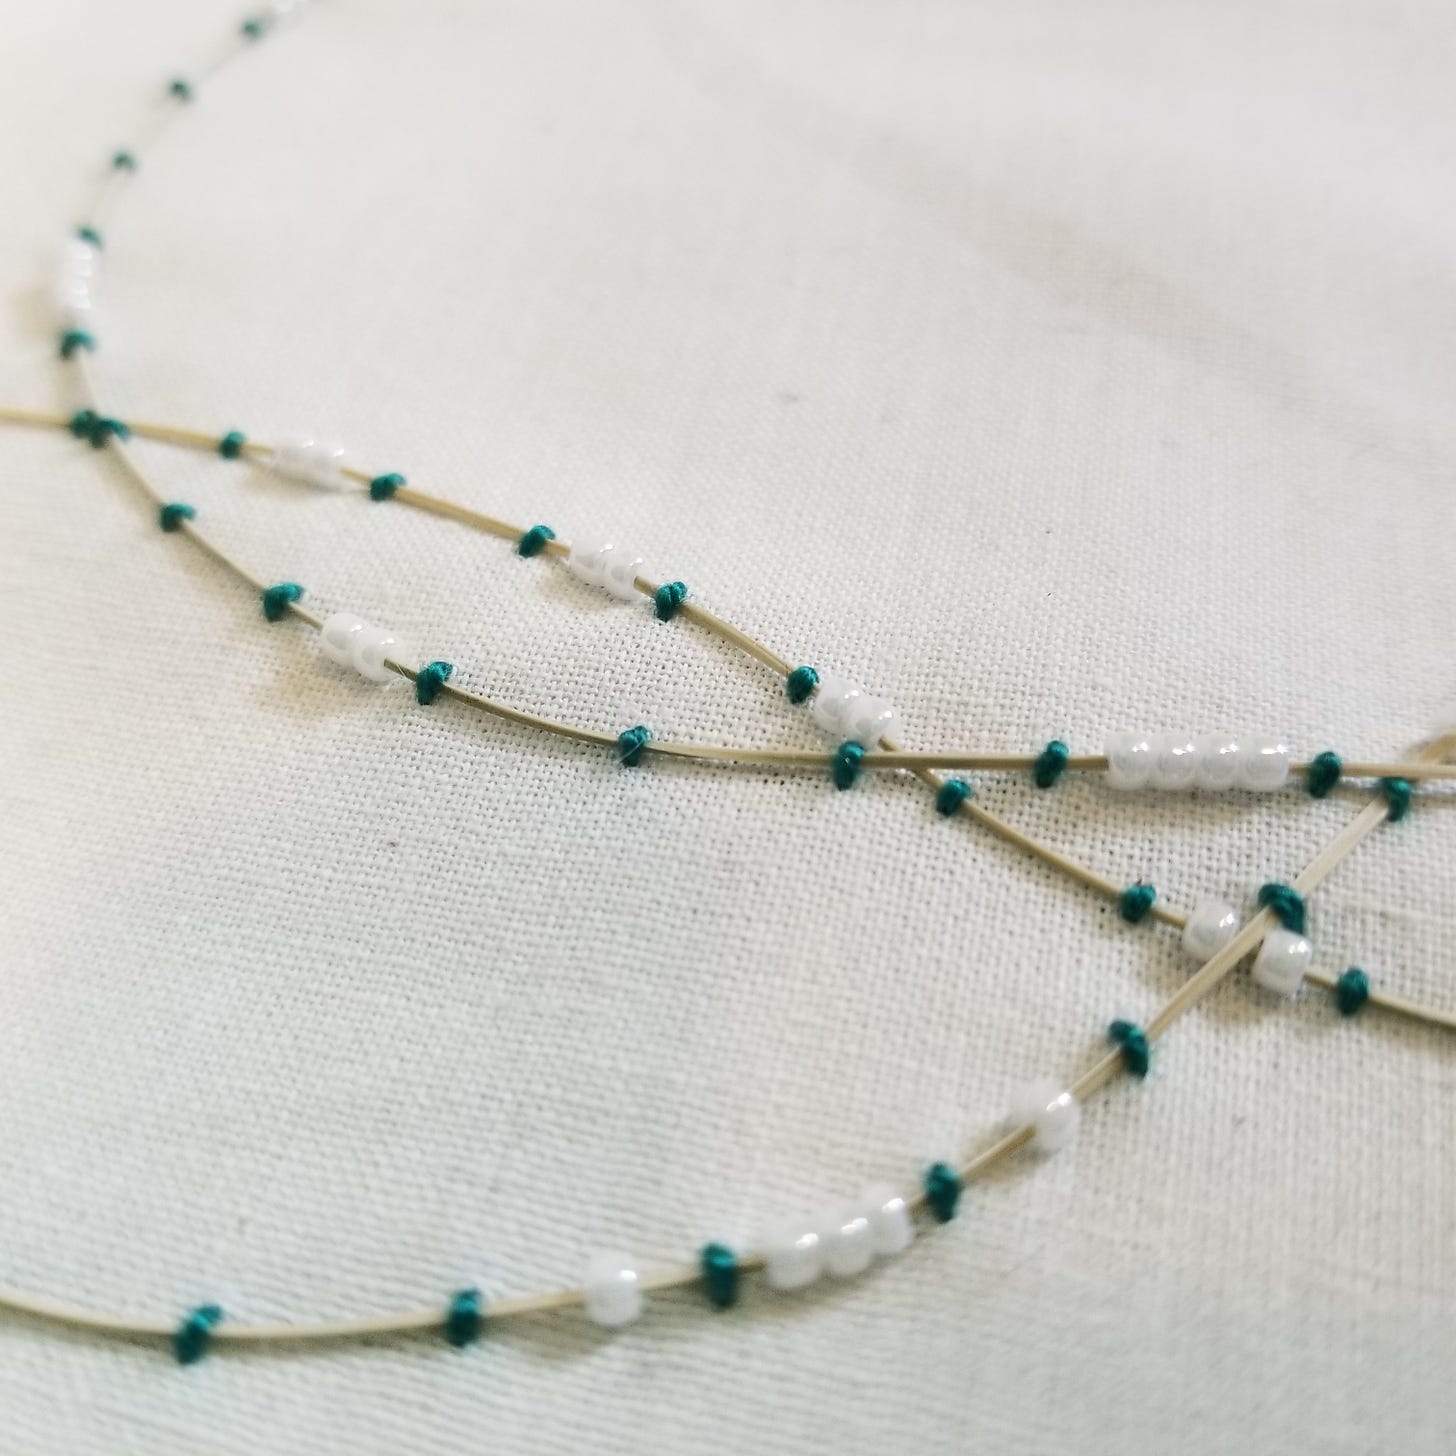 dried grass couched onto muslin fabric  with green thread and white glass beads